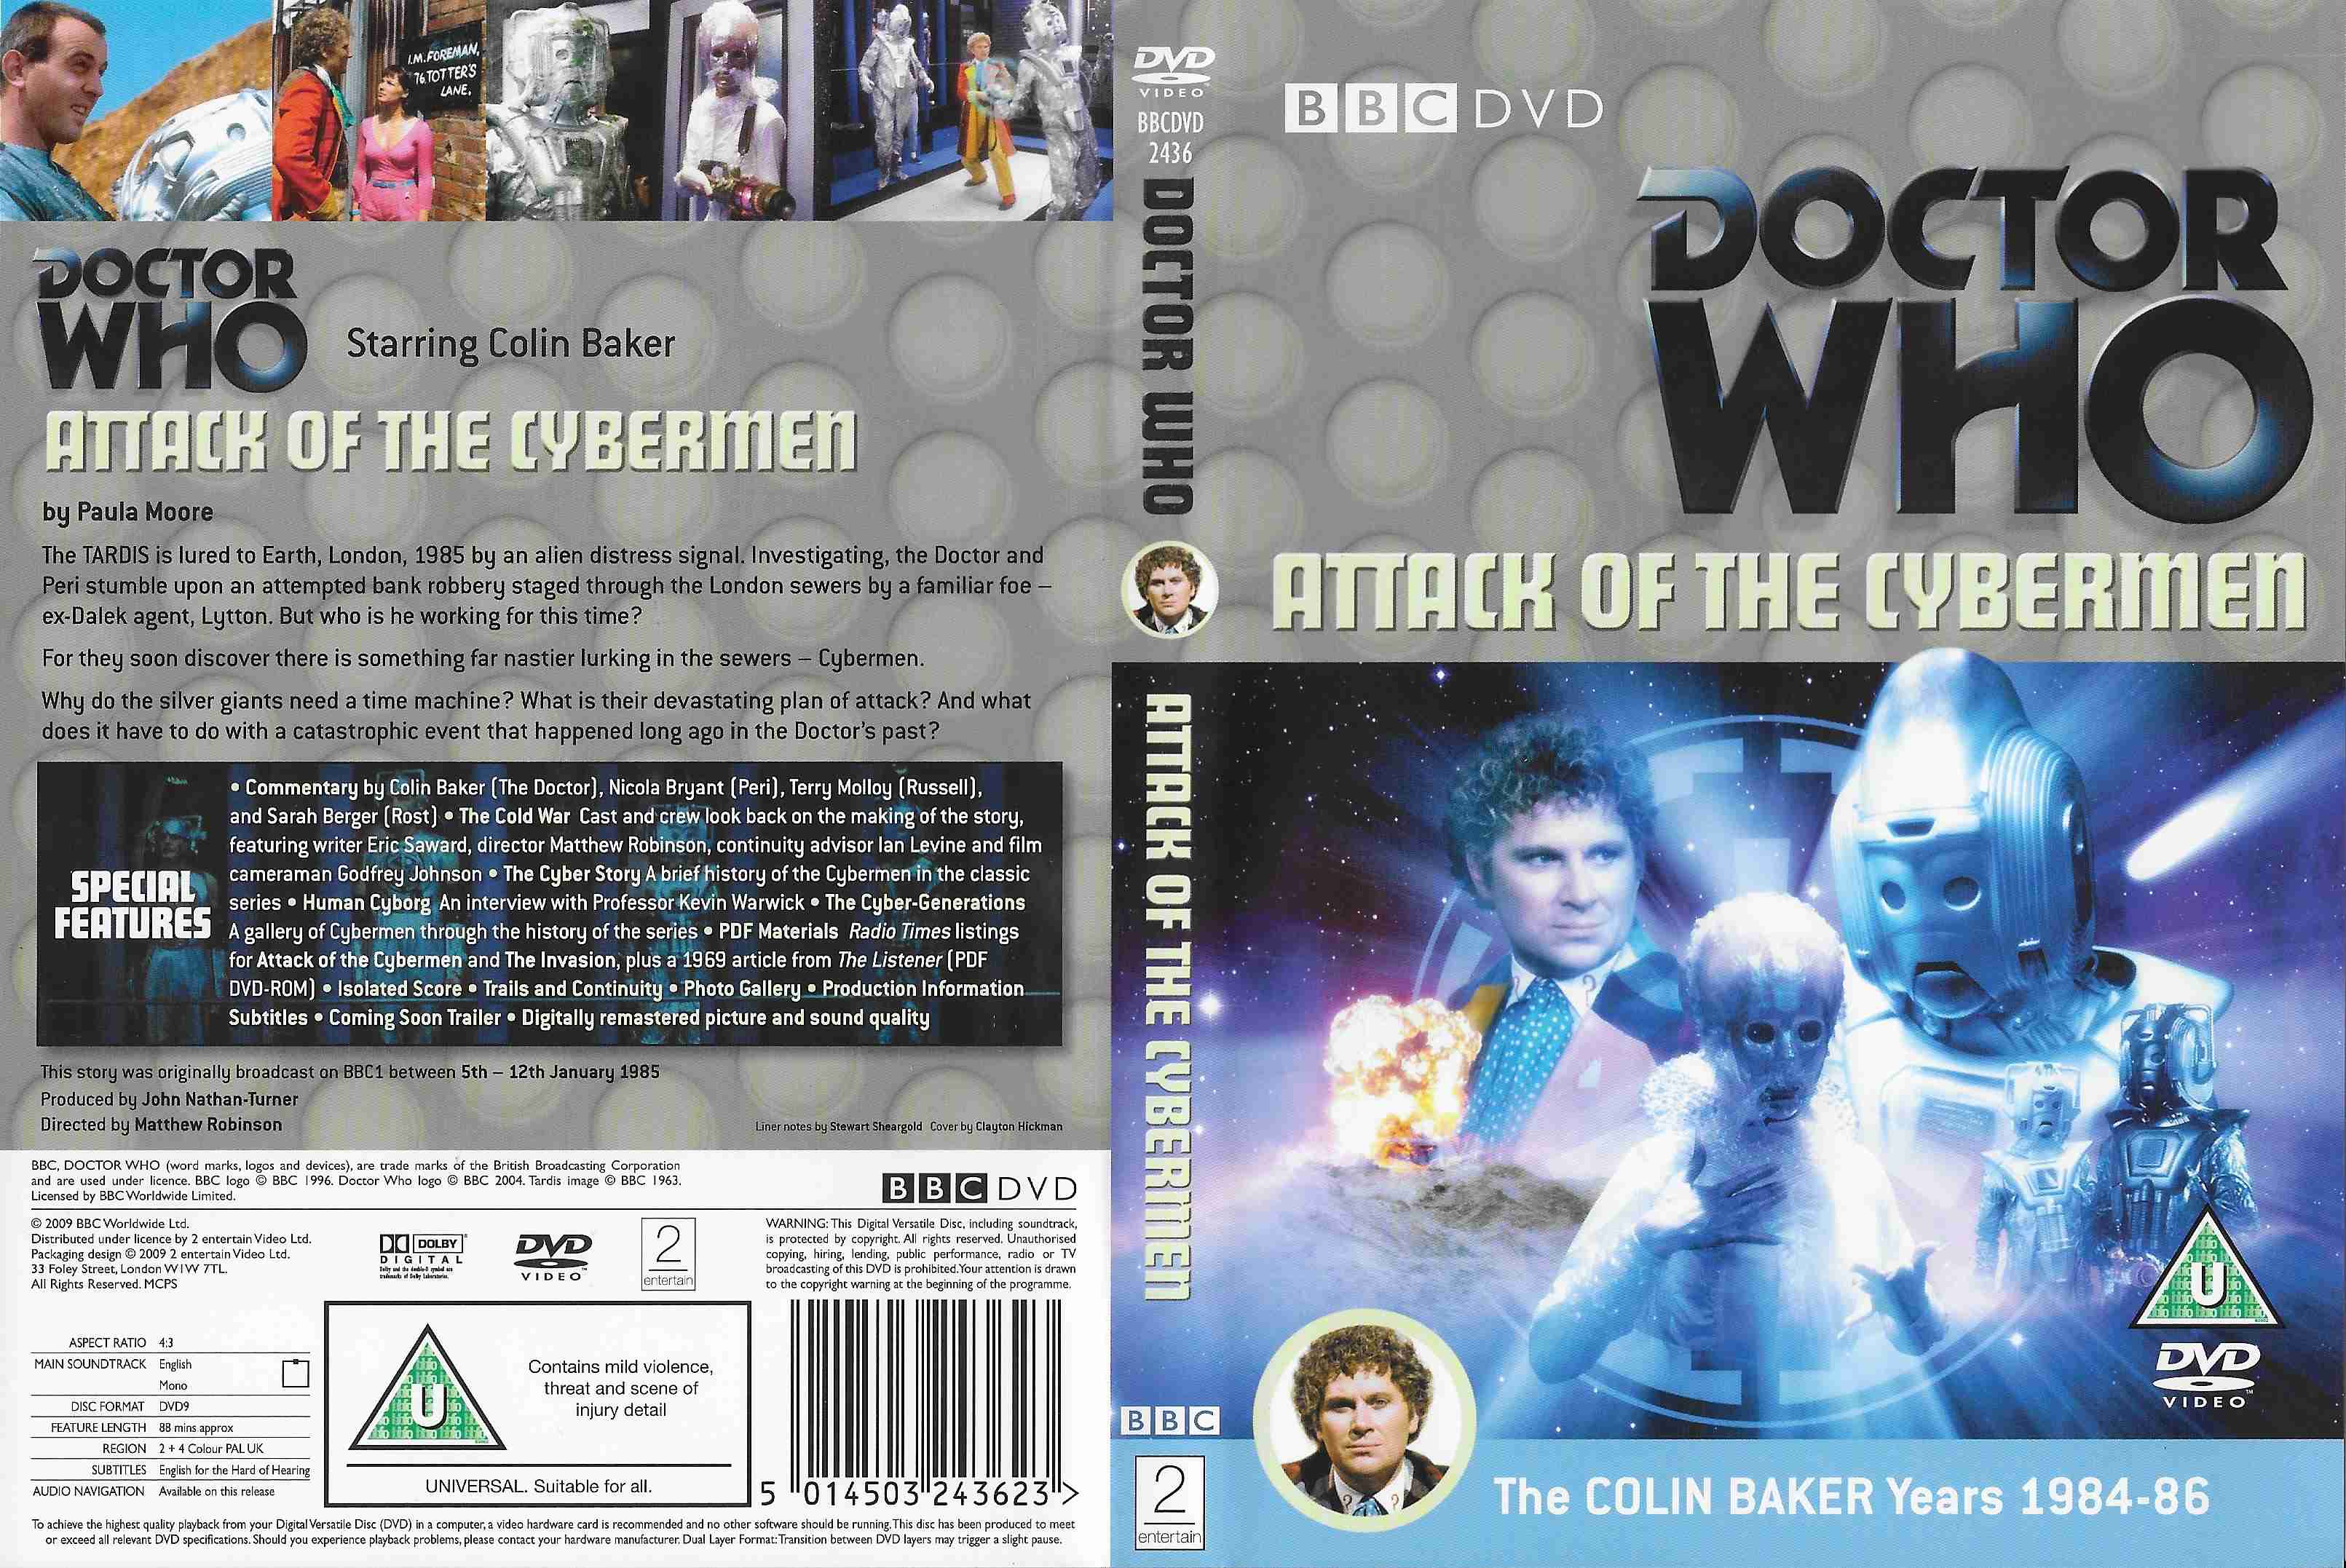 Picture of BBCDVD 2436 Doctor Who - Attack of the Cybermen by artist Paula Moore from the BBC records and Tapes library